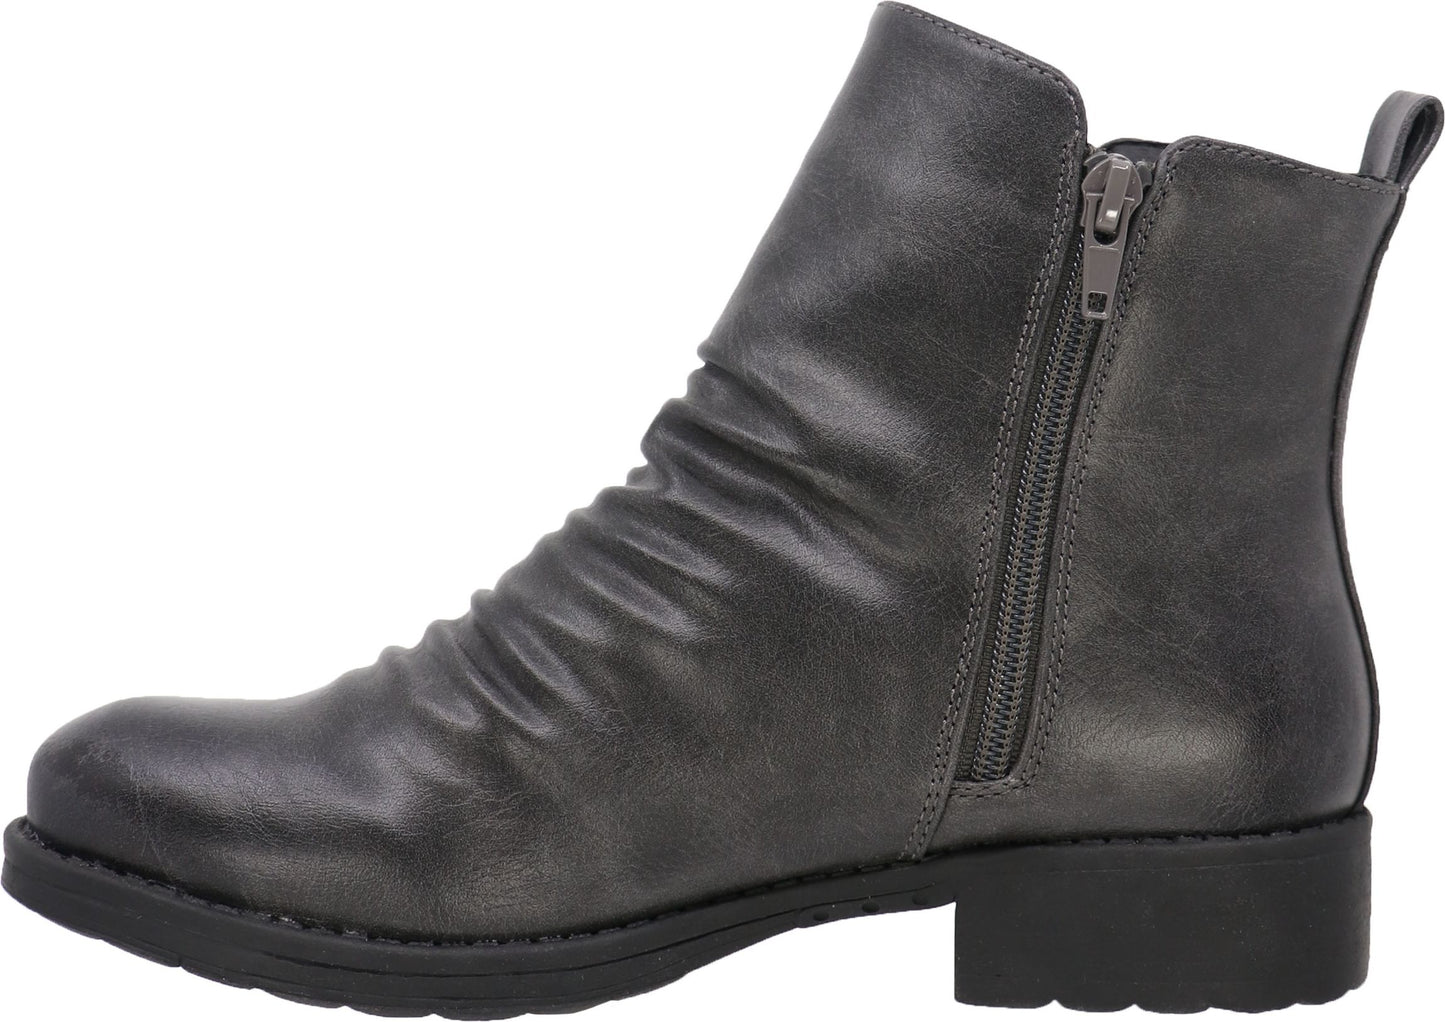 Taxi Boots Addison 08 Grey